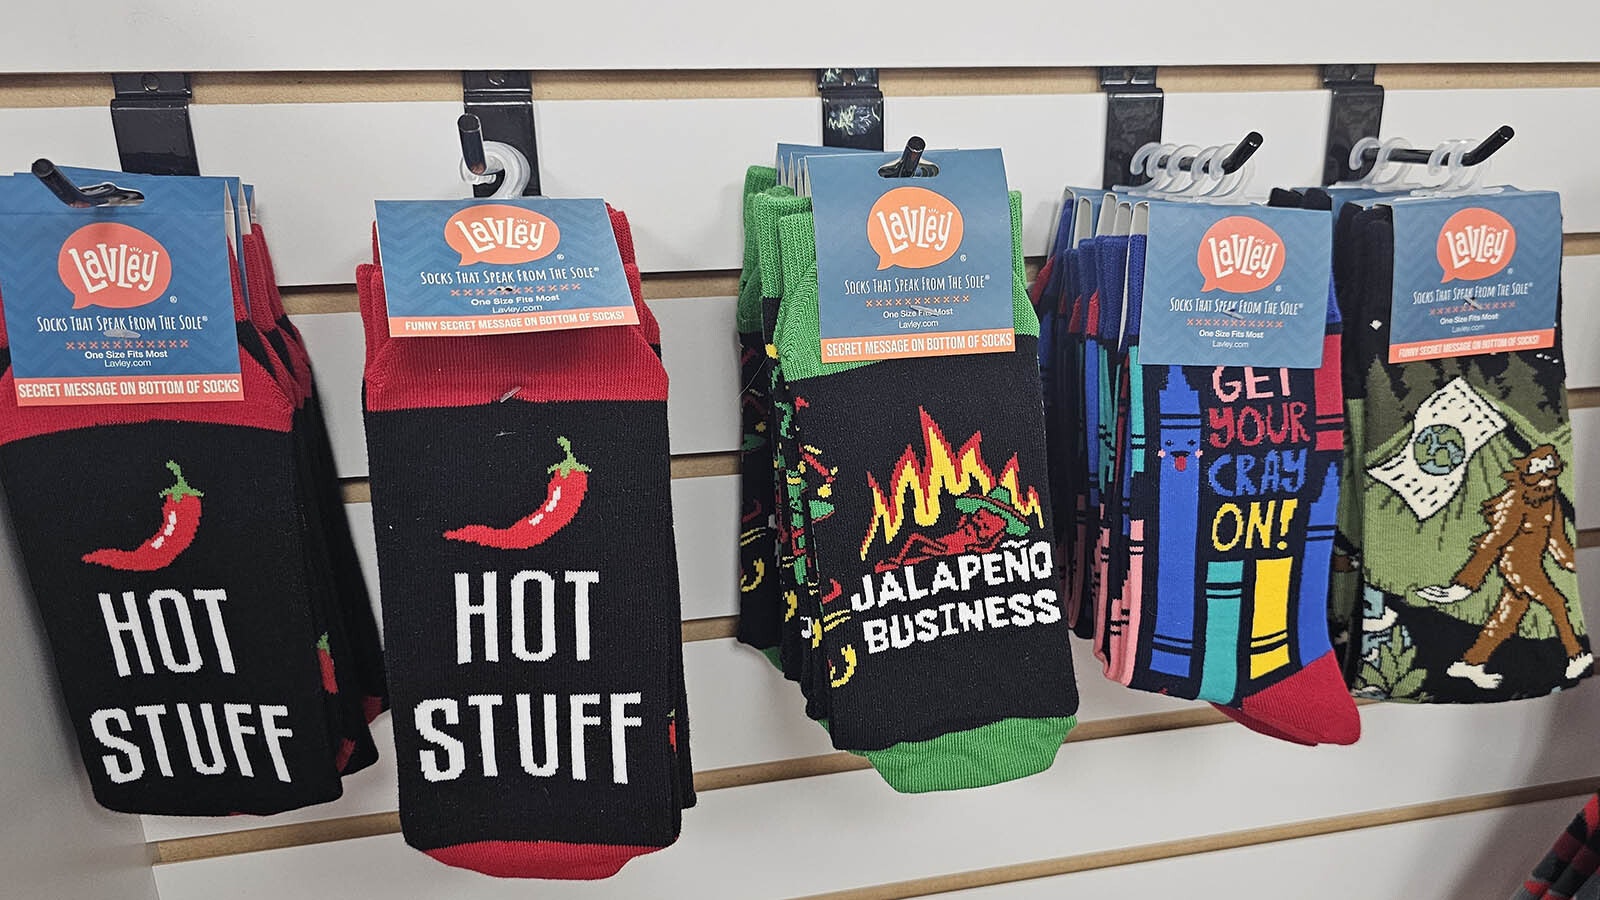 Here are the perfect socks for chili-heads.